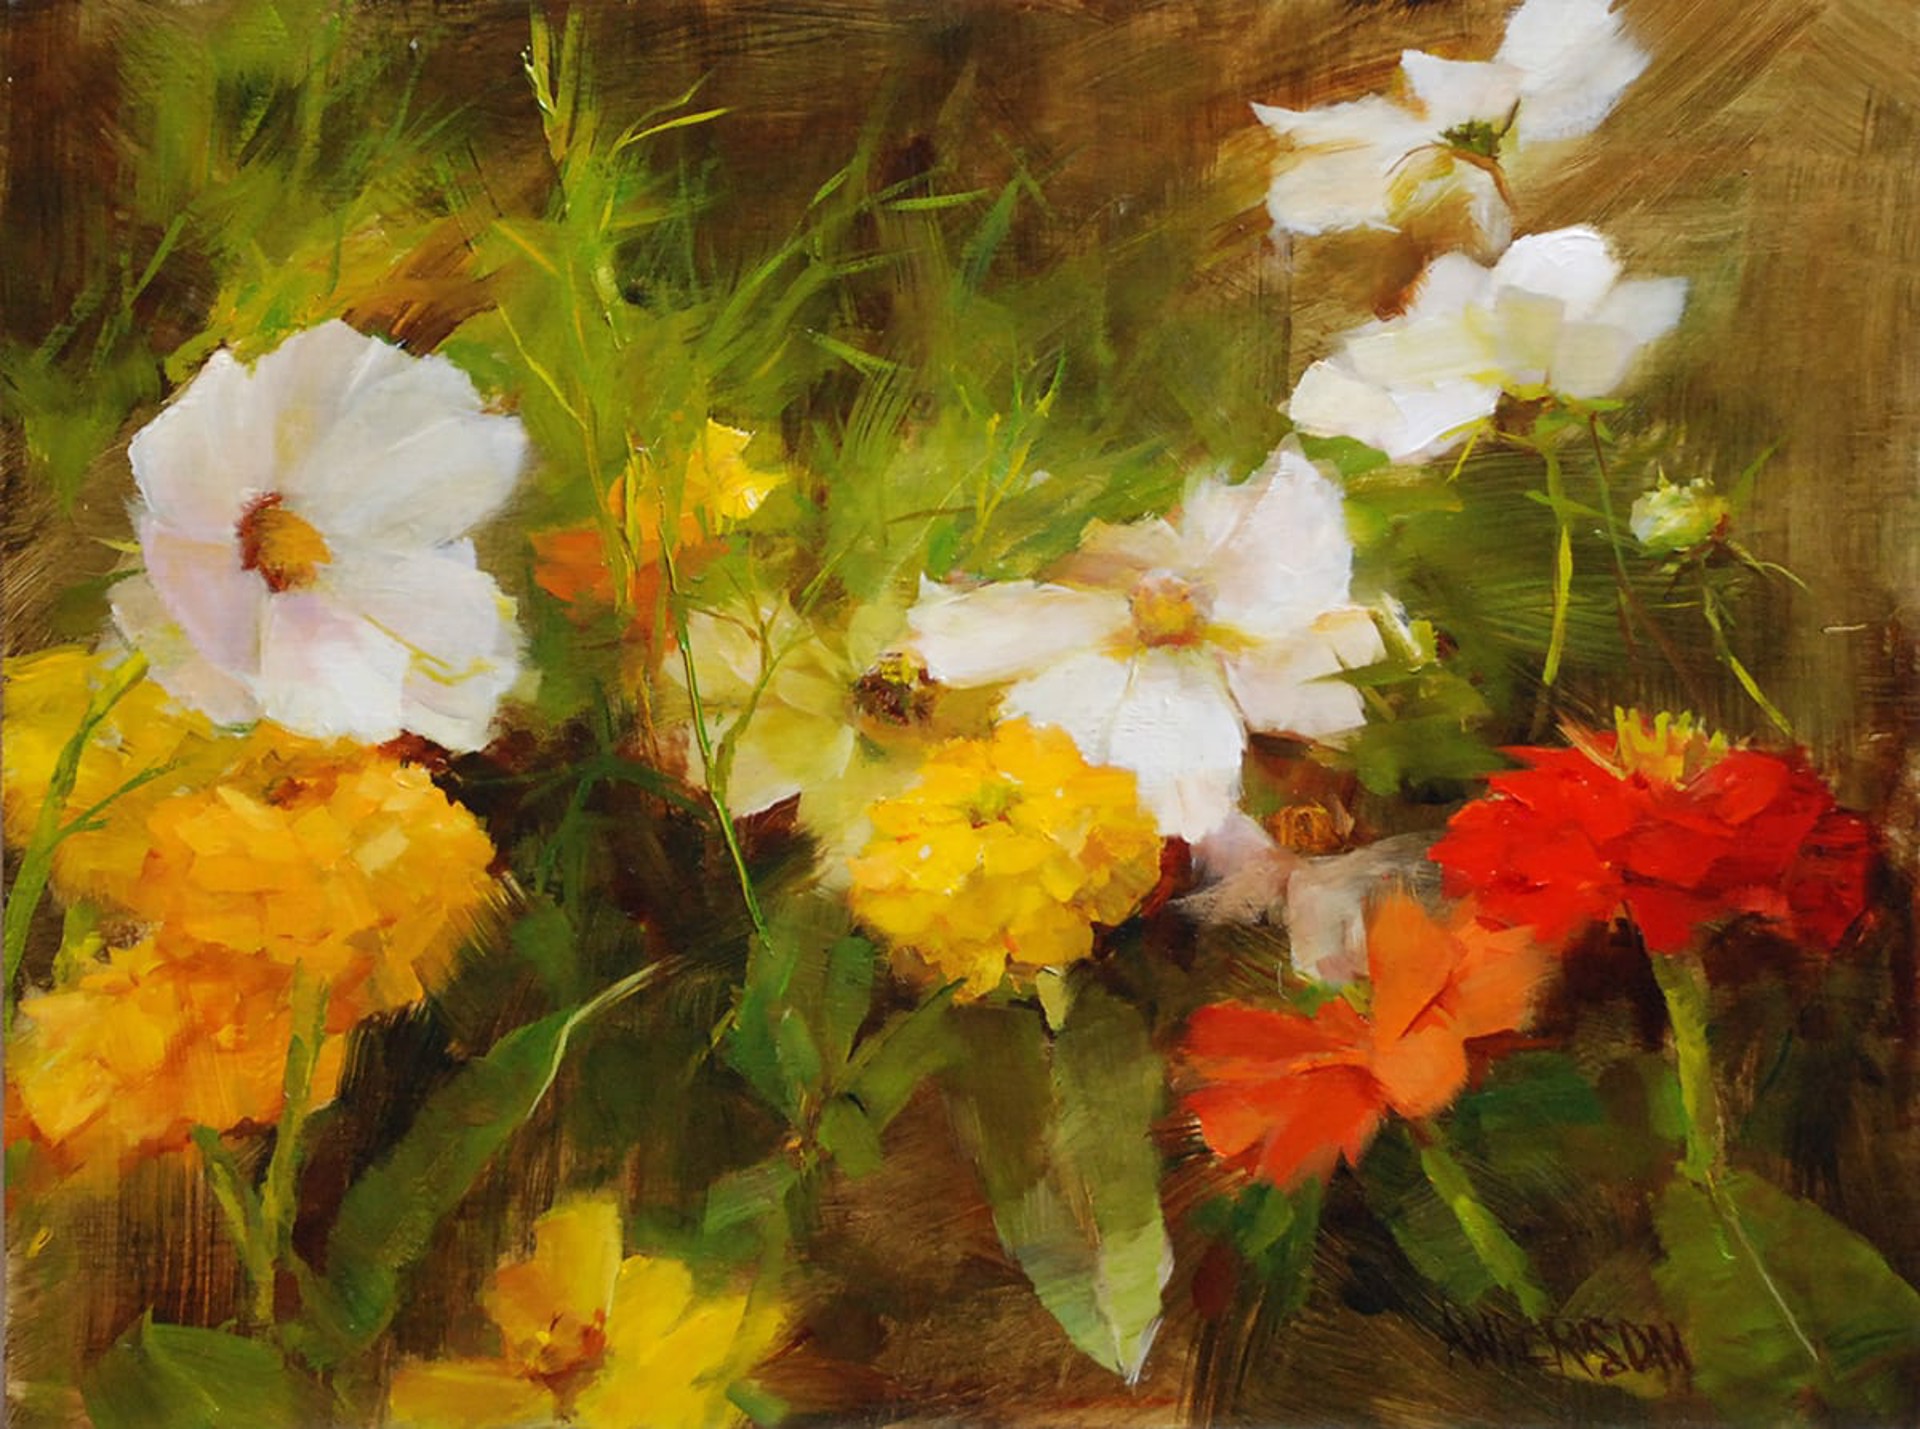 Yellow Zinnias with Cosmos by Kathy Anderson